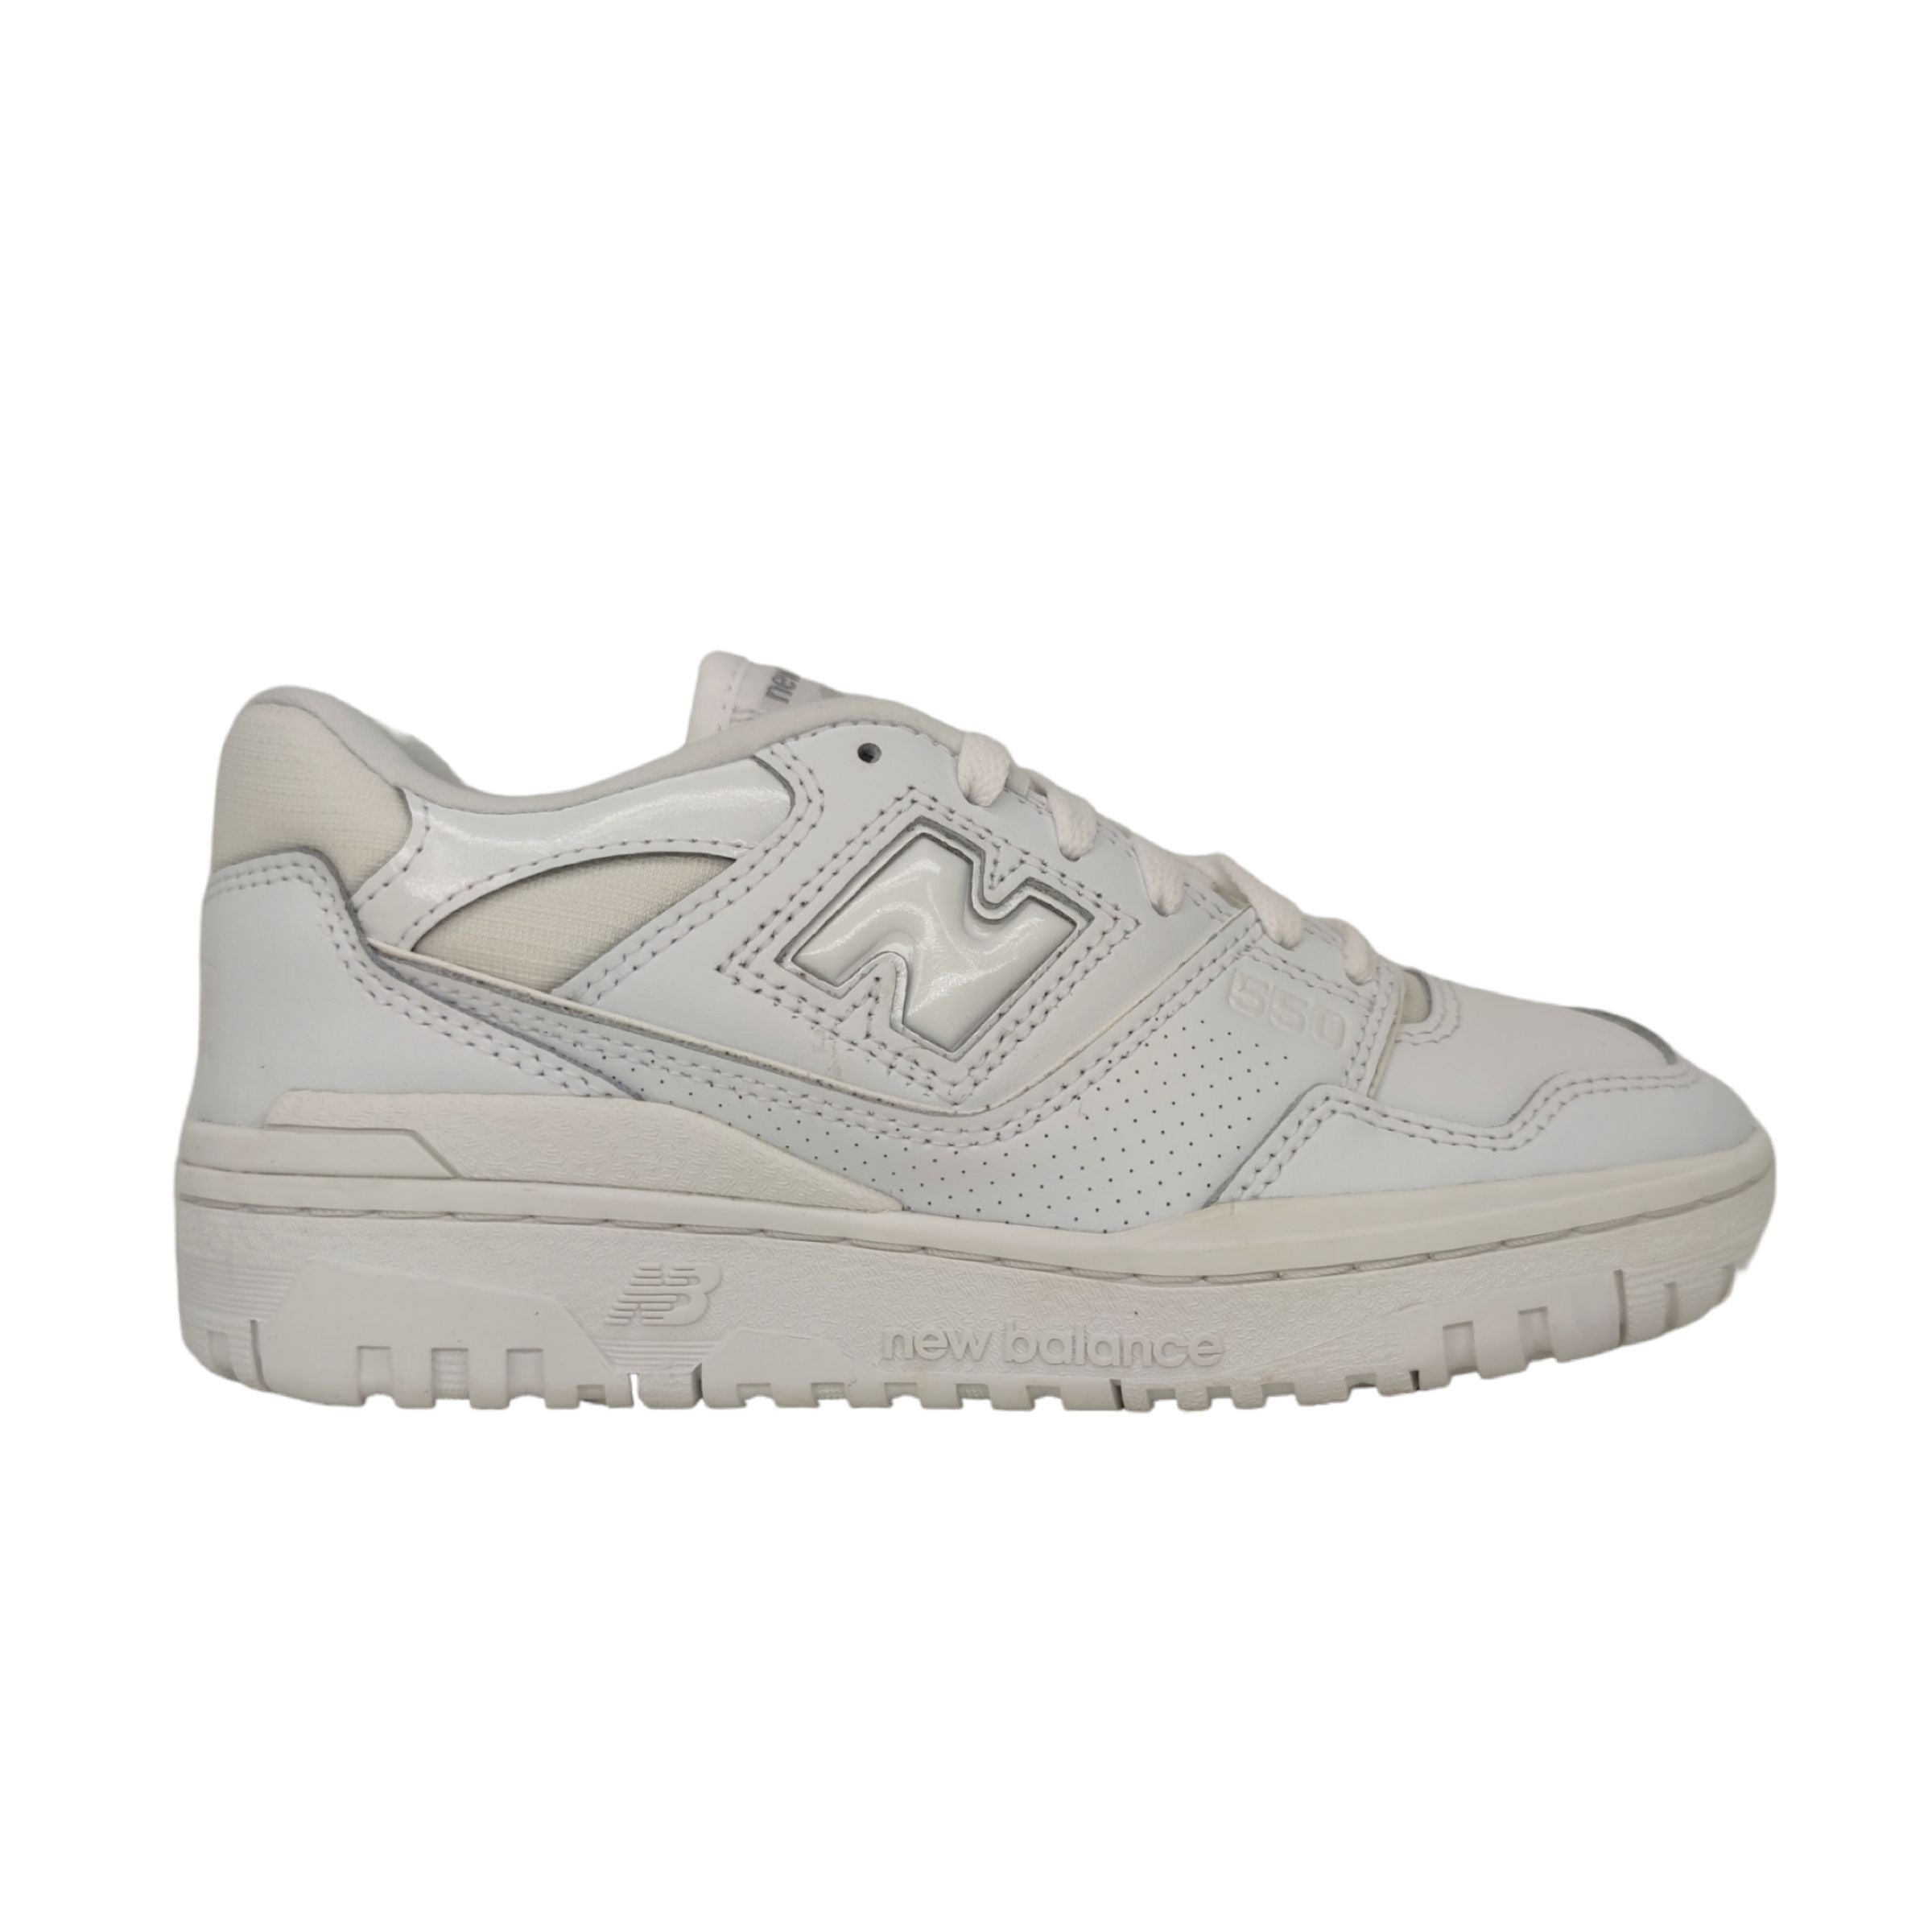 Women's 550 Shoes All White 